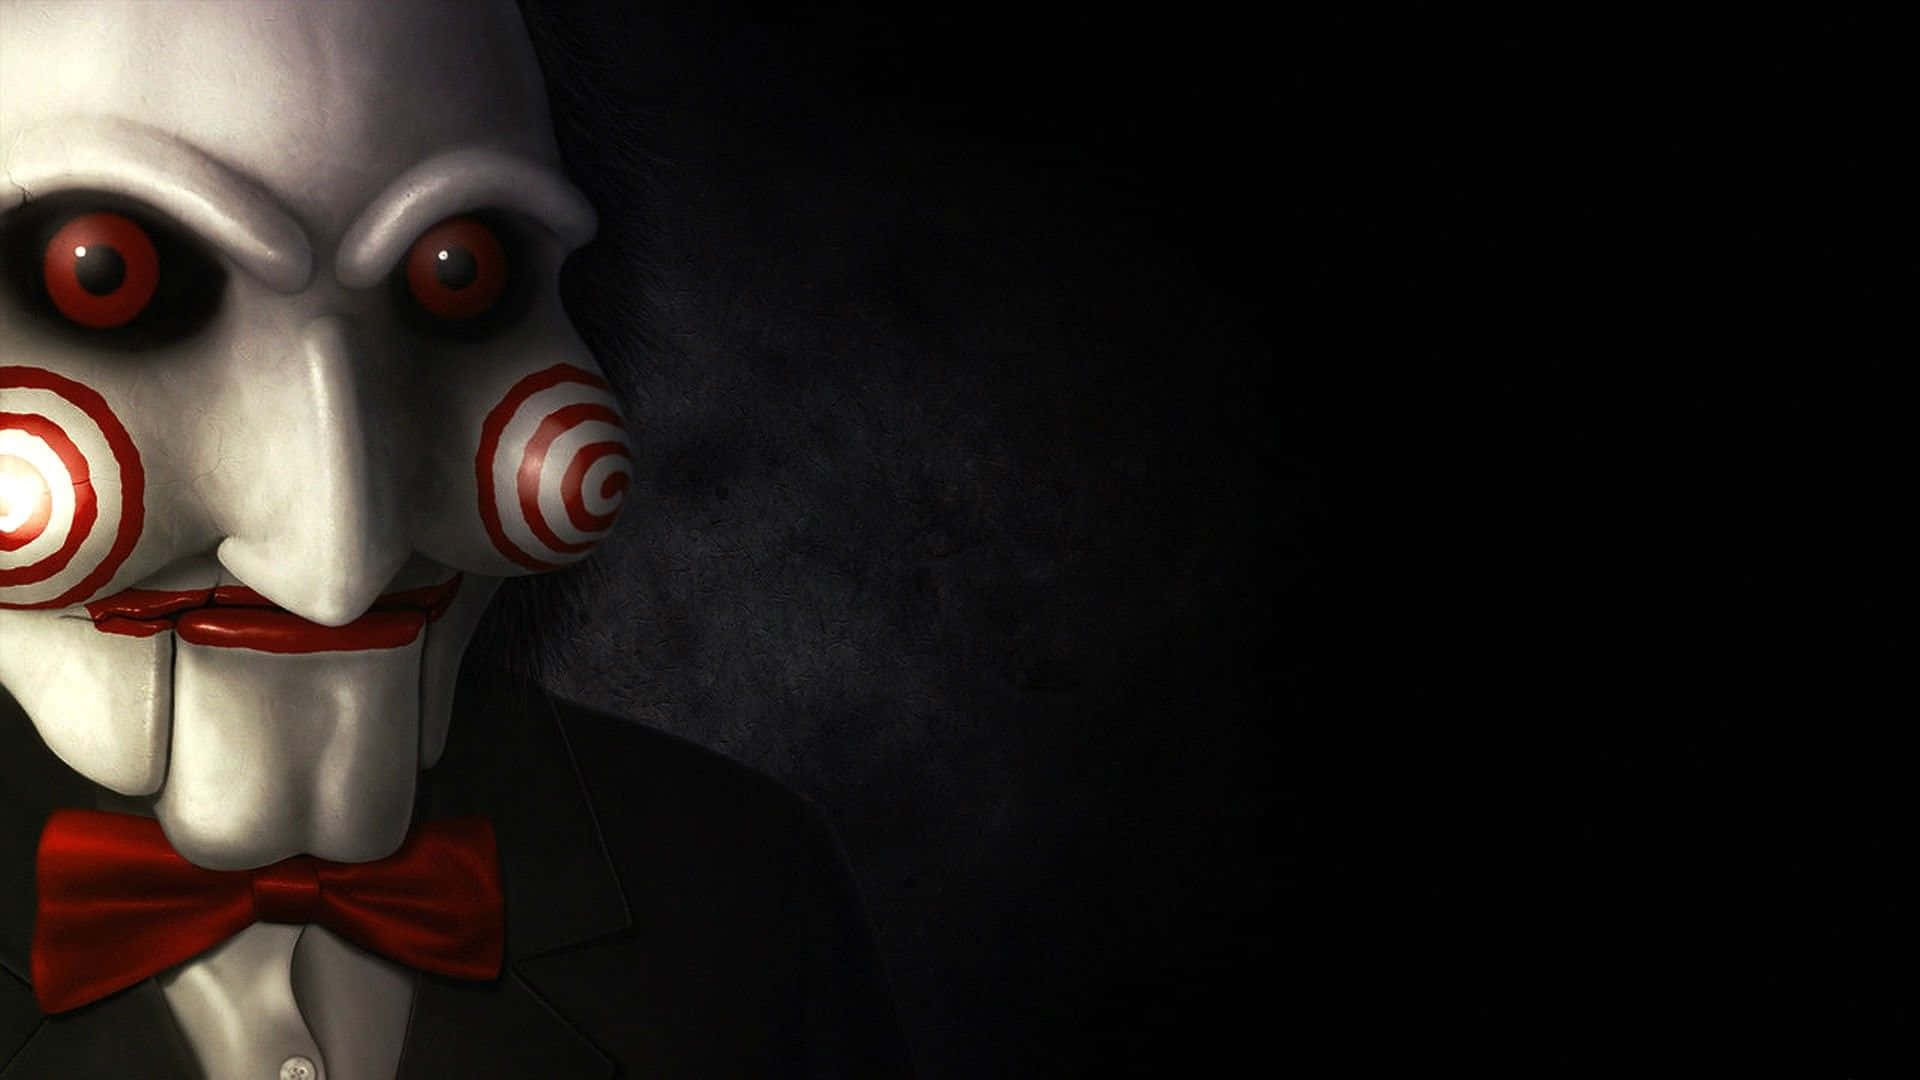 A Creepy Clown Mask With A Bow Tie Wallpaper